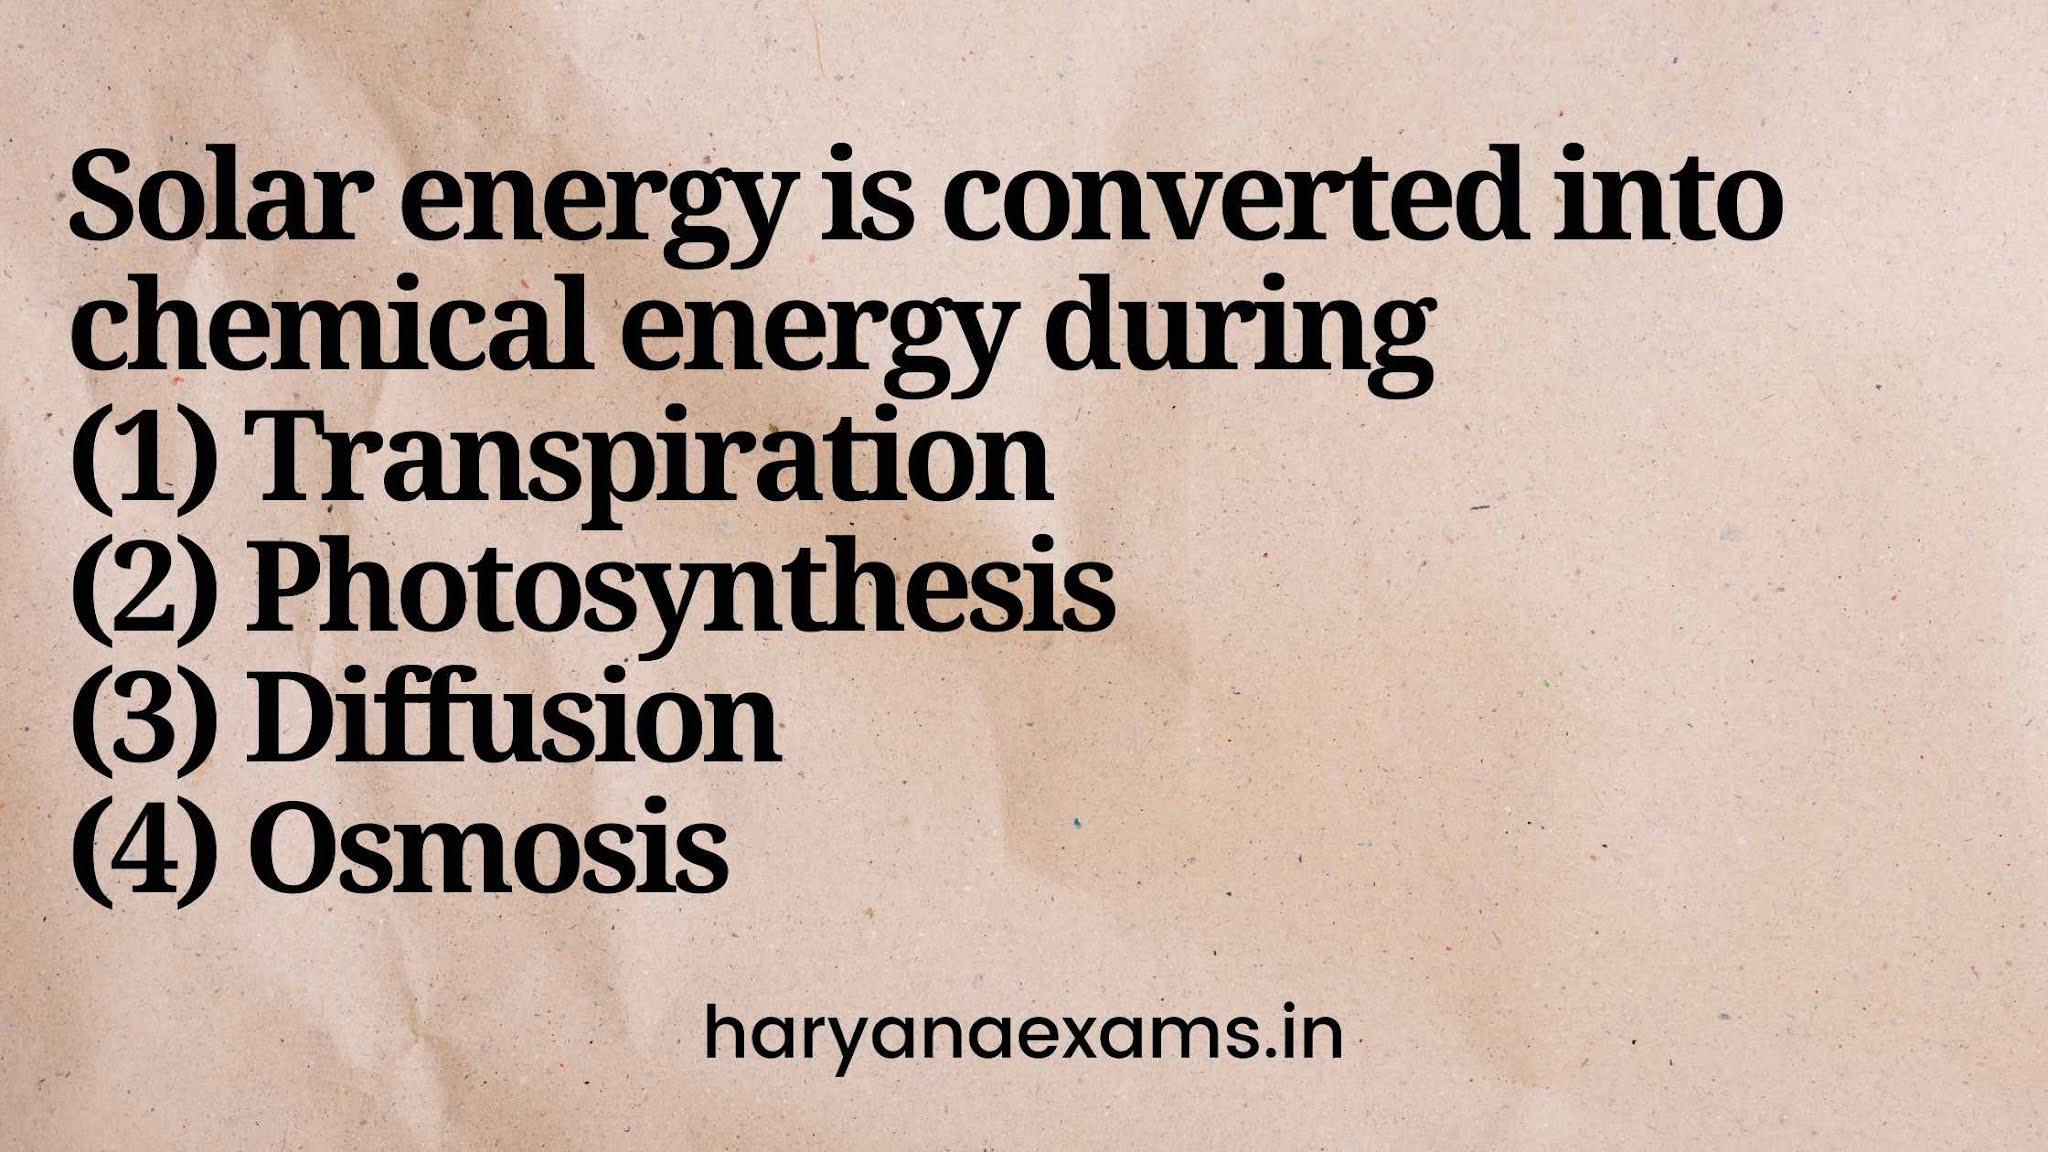 Solar energy is converted into chemical energy during   (1) Transpiration   (2) Photosynthesis   (3) Diffusion   (4) Osmosis